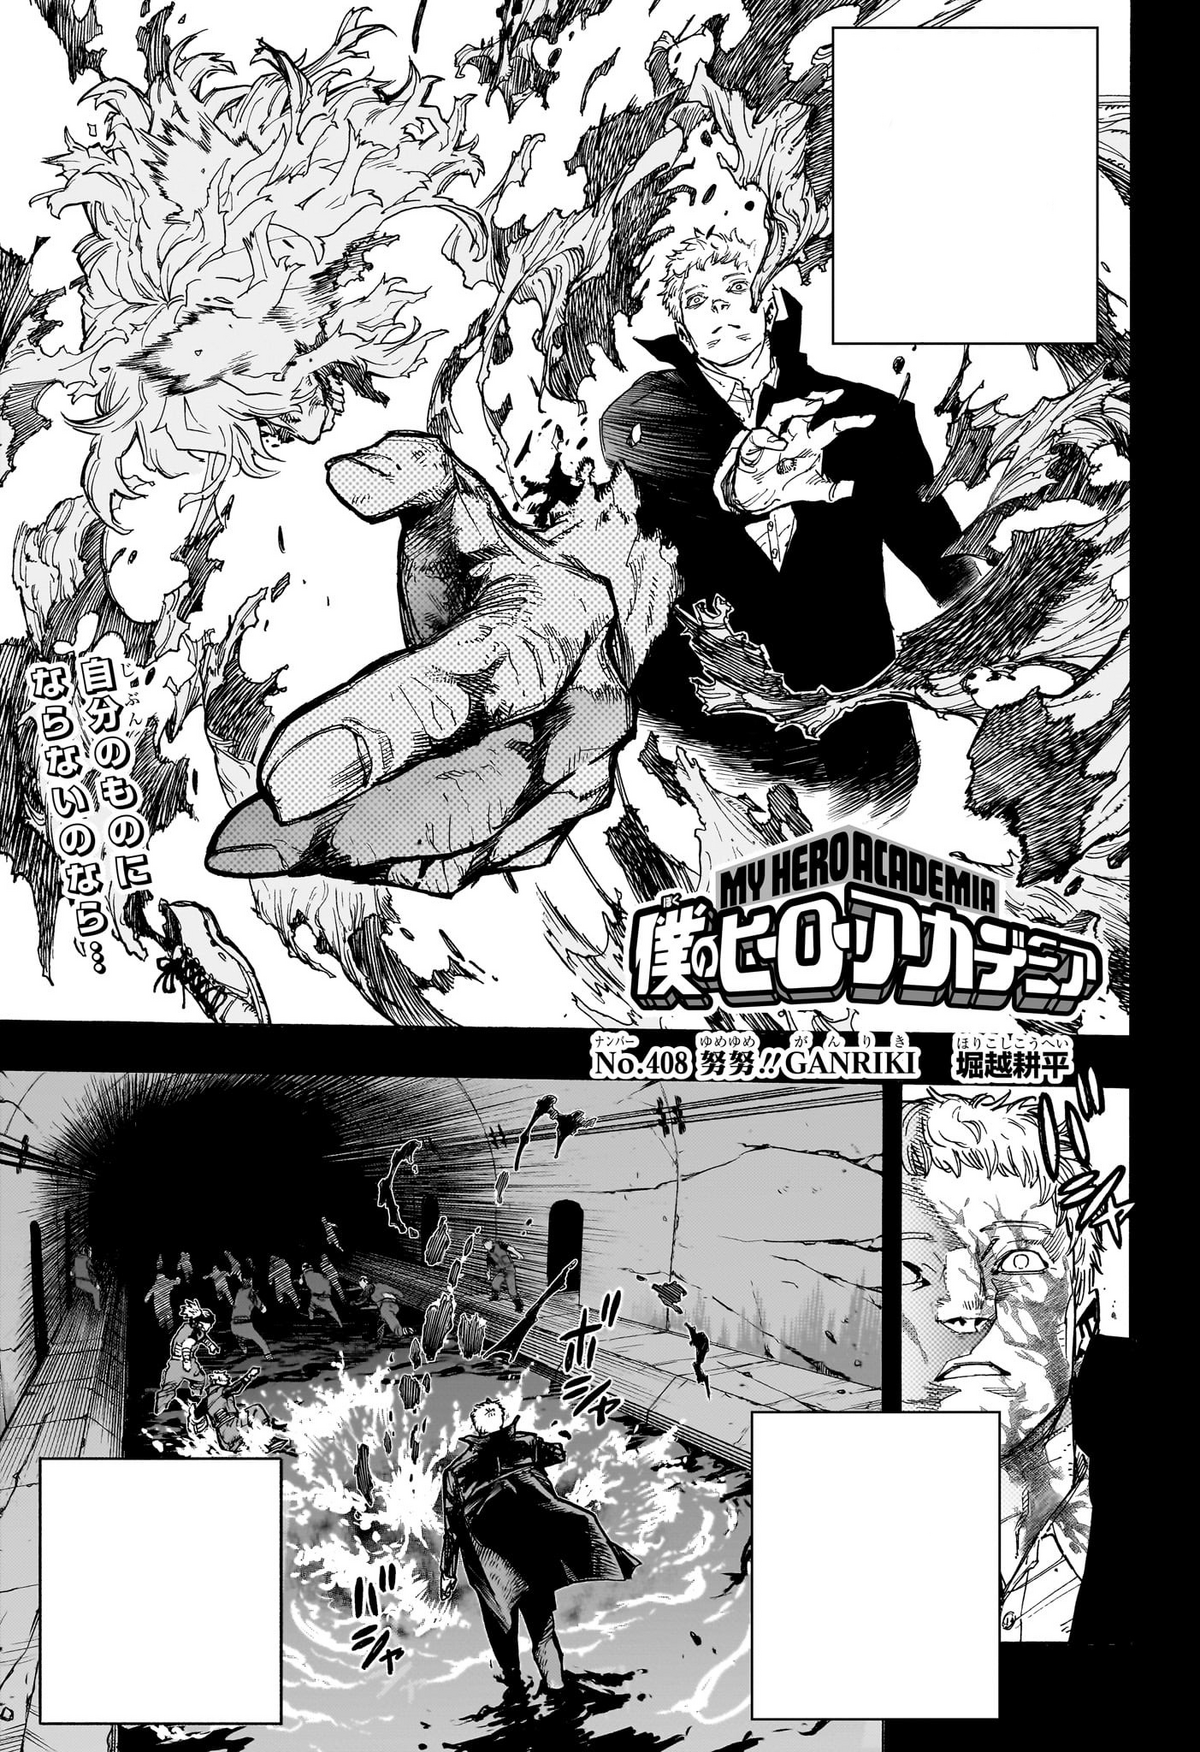 My Hero Academia Chapter 408 Preview: Kudo Vs. All For One